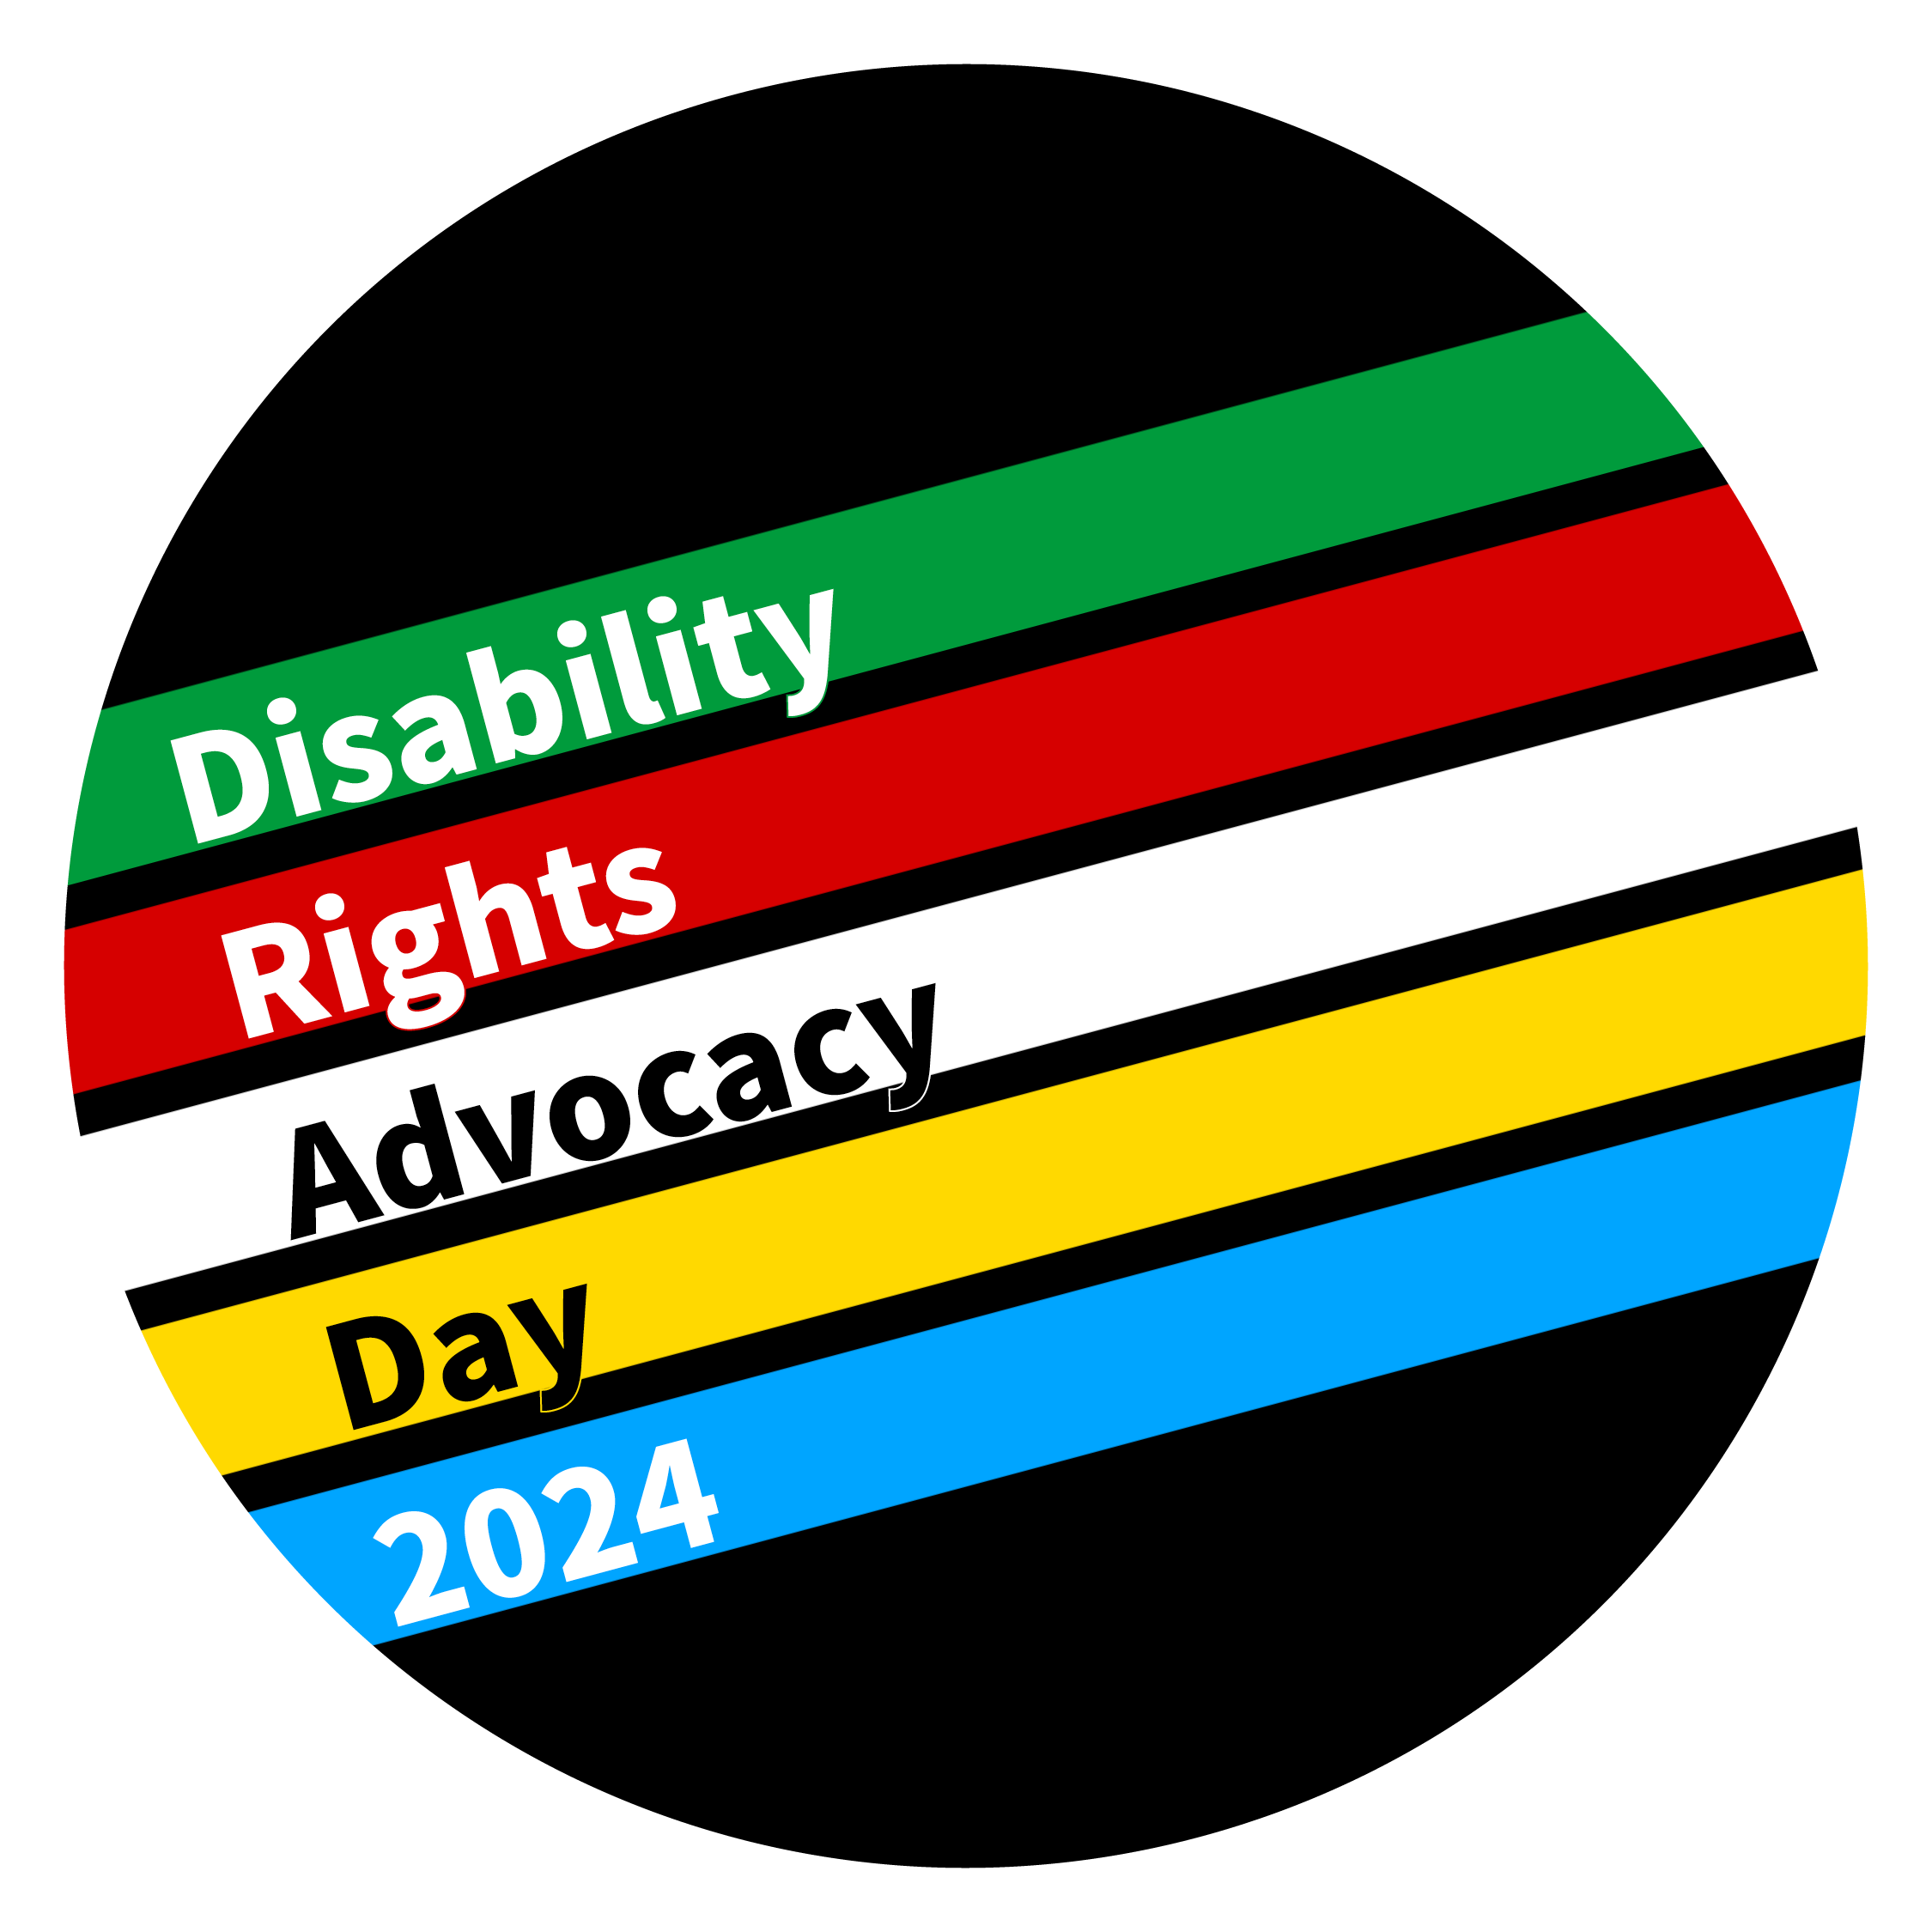 Disability rights advocacy day 2024 logo